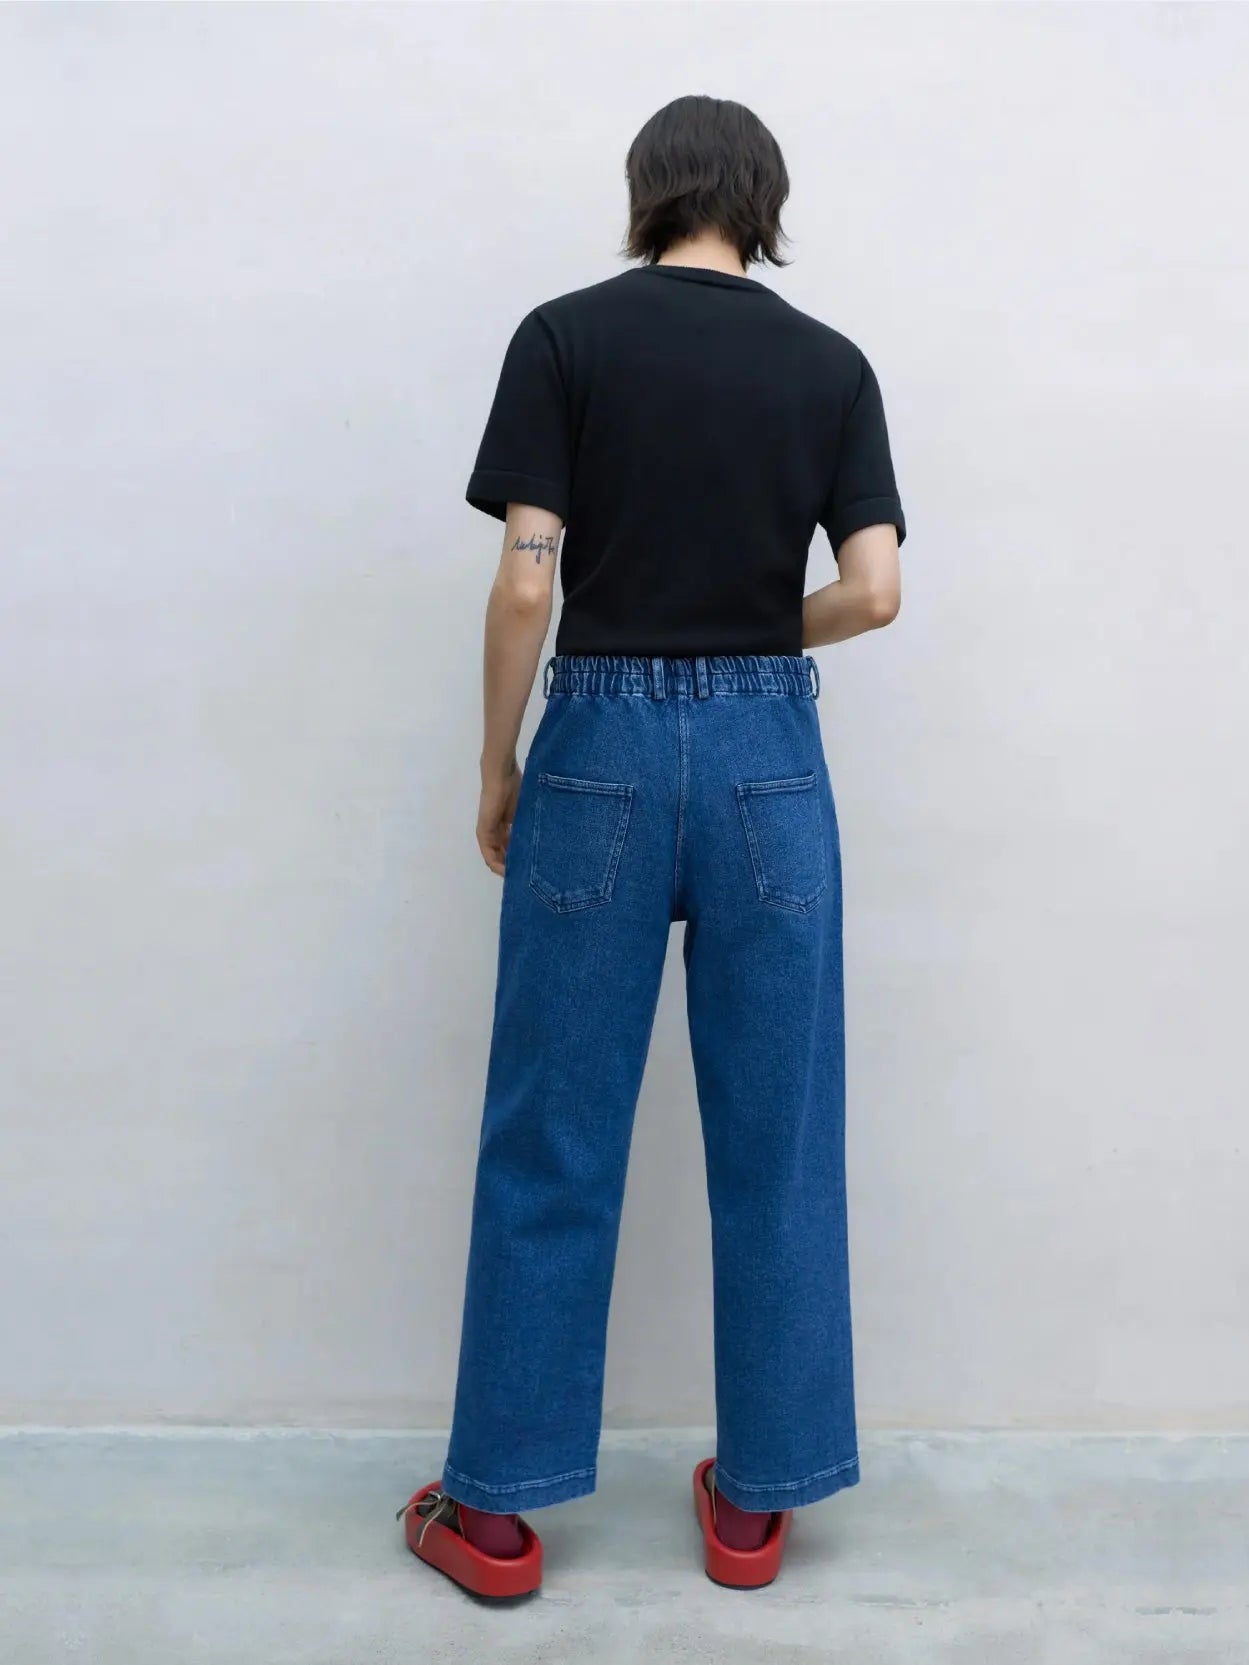 A pair of Straight Denim Pants Indigo with a high waist and straight-leg cut, available at Bassalstore in Barcelona. The Cordera pants feature a button and zipper closure, front pockets, and a simple design with no visible embellishments or distressing.